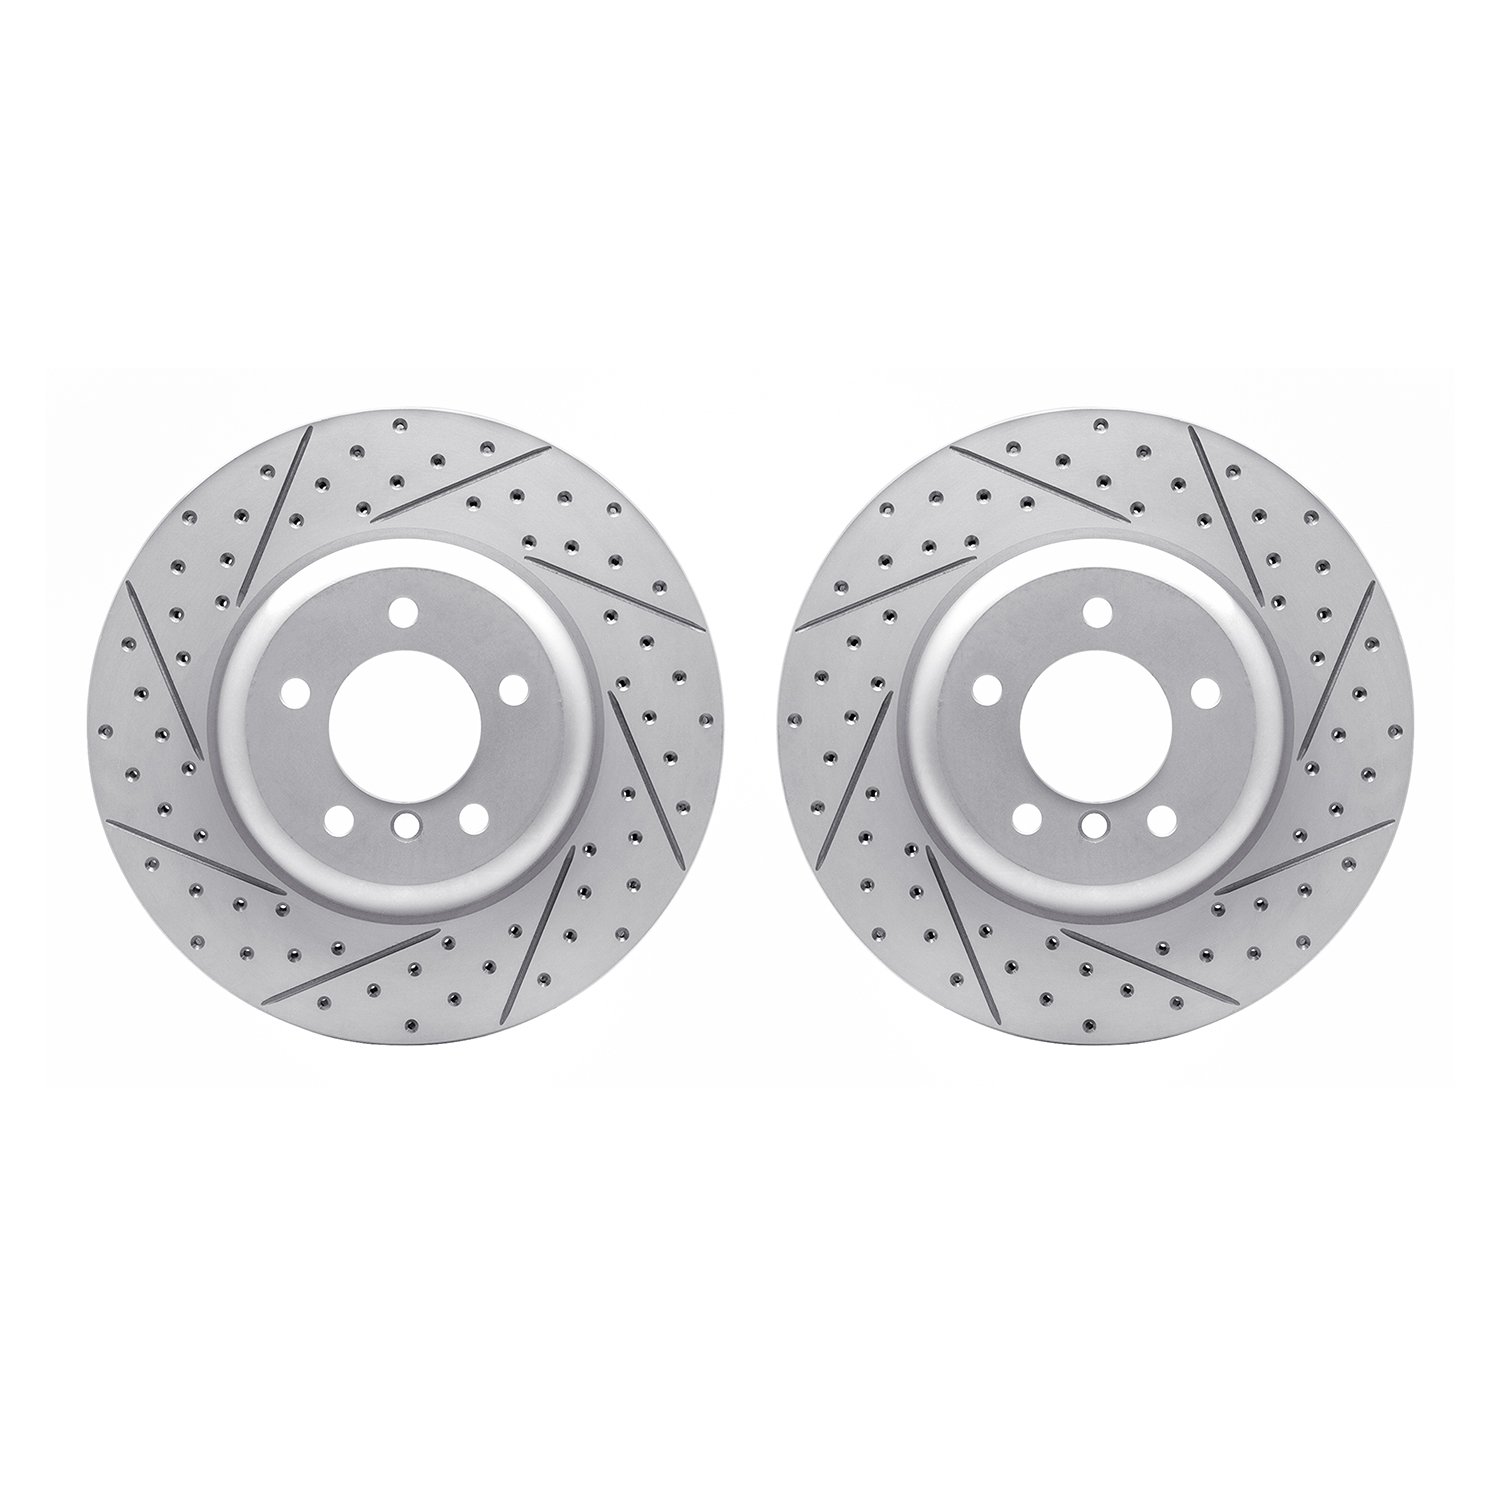 2002-31025 Geoperformance Drilled/Slotted Brake Rotors, 2004-2010 BMW, Position: Front